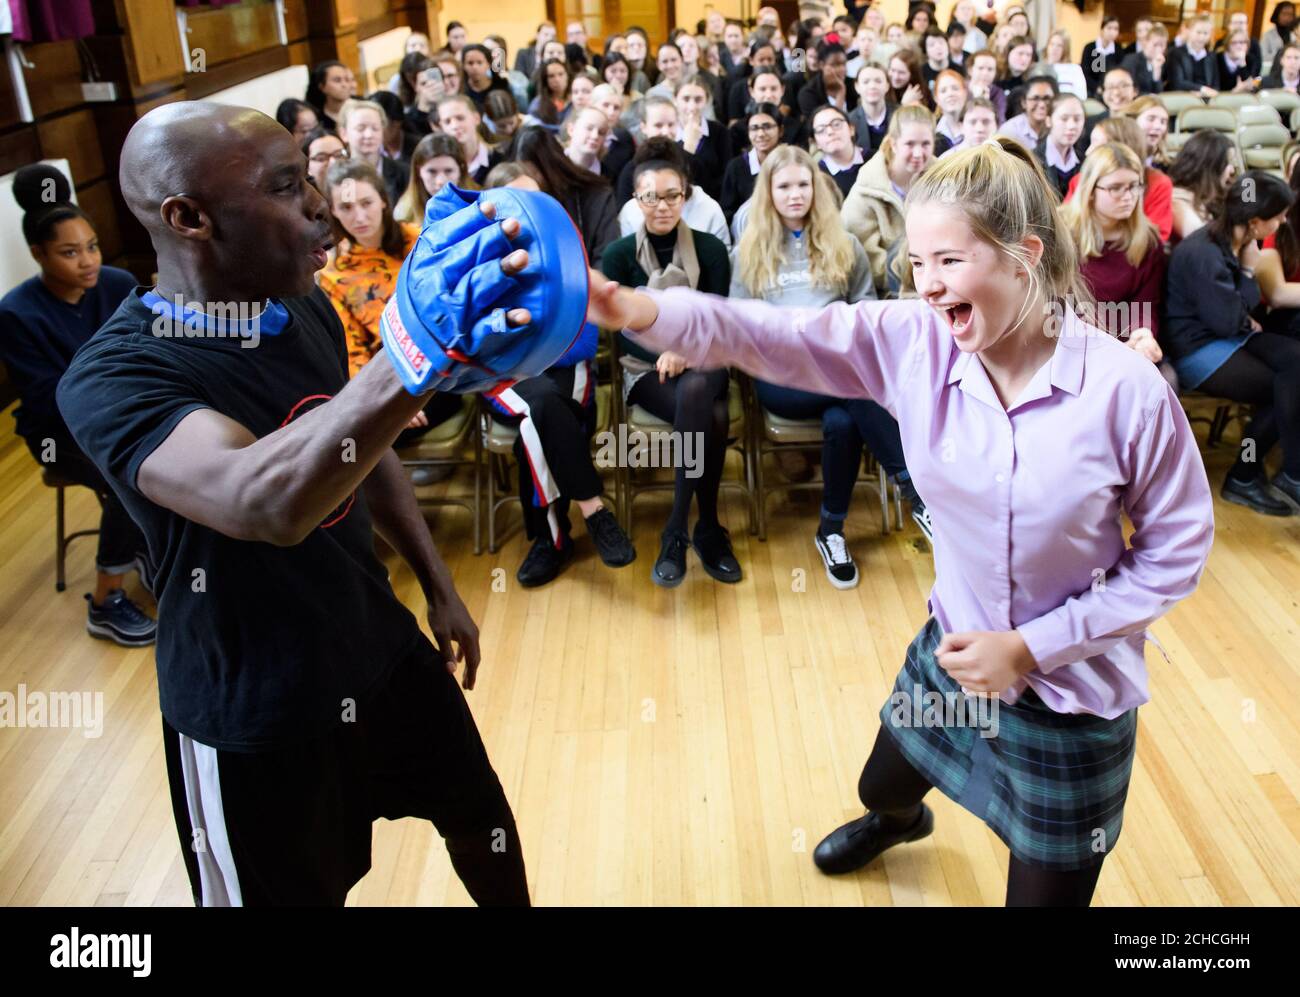 Calvin Thompson, Facilitator from Action Breaks Silence, instructs Eve Fitzsimons, aged 15, in Feminist Self-Defence at the Speak-Up Summit: an all-day immersive experience on issues from domestic violence to women's empowerment at Streatham & Clapham High School GDST, London. Stock Photo